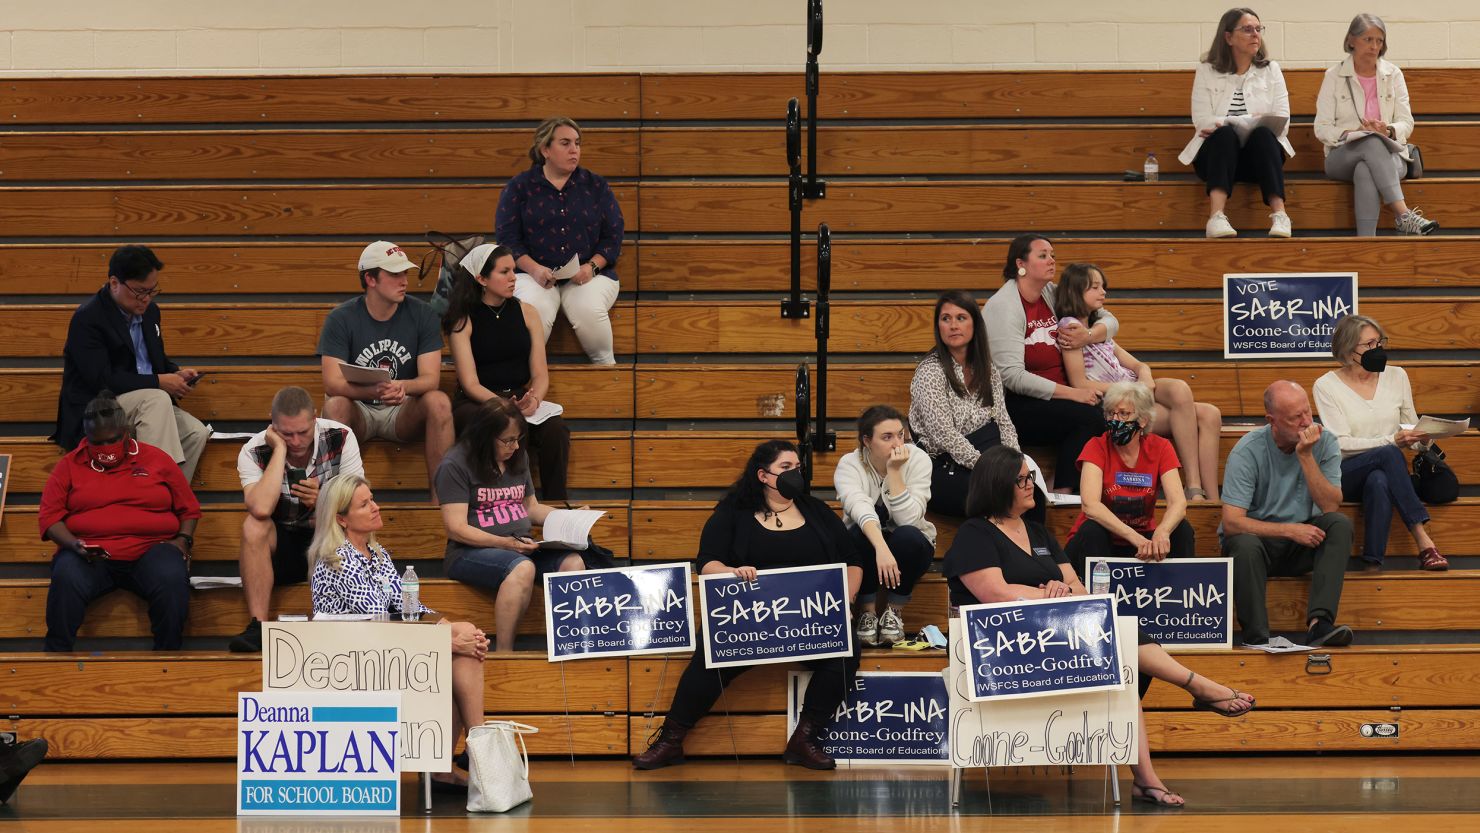 School board candidates and their supporters attend a student-hosted candidate forum at West Forsyth High School in Clemmons, North Carolina, on May 11.